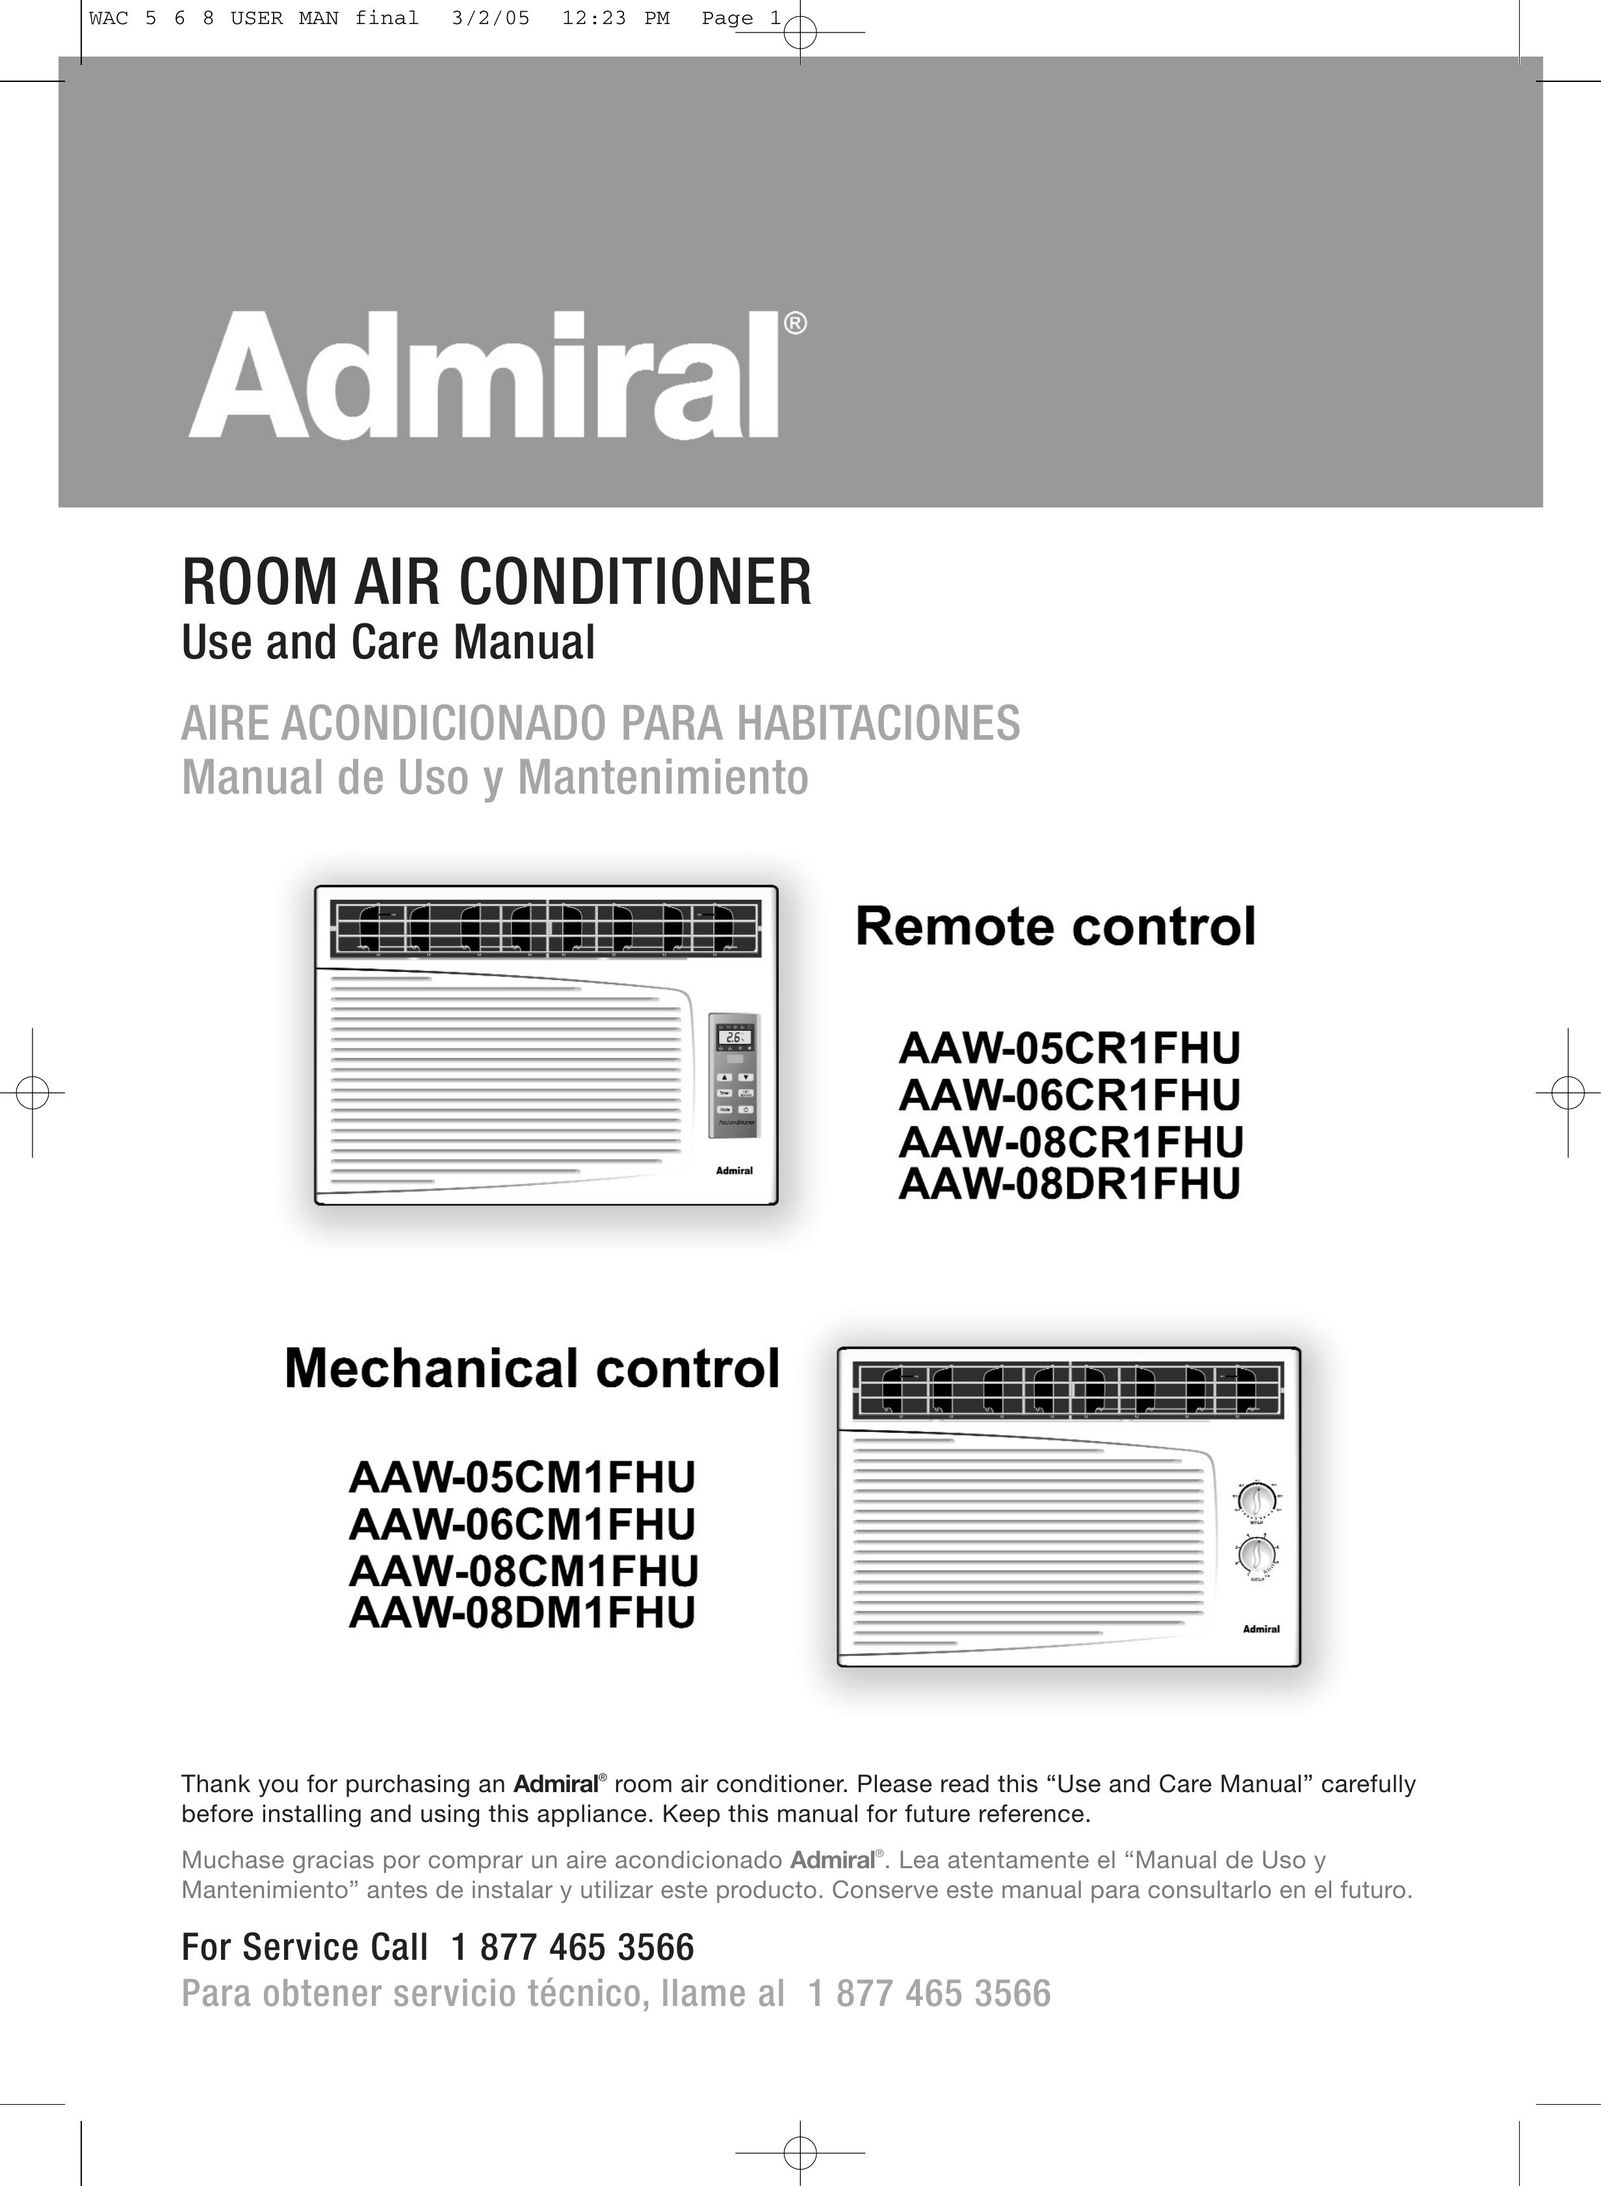 Admiral AAW-05CM1FHU Air Conditioner User Manual